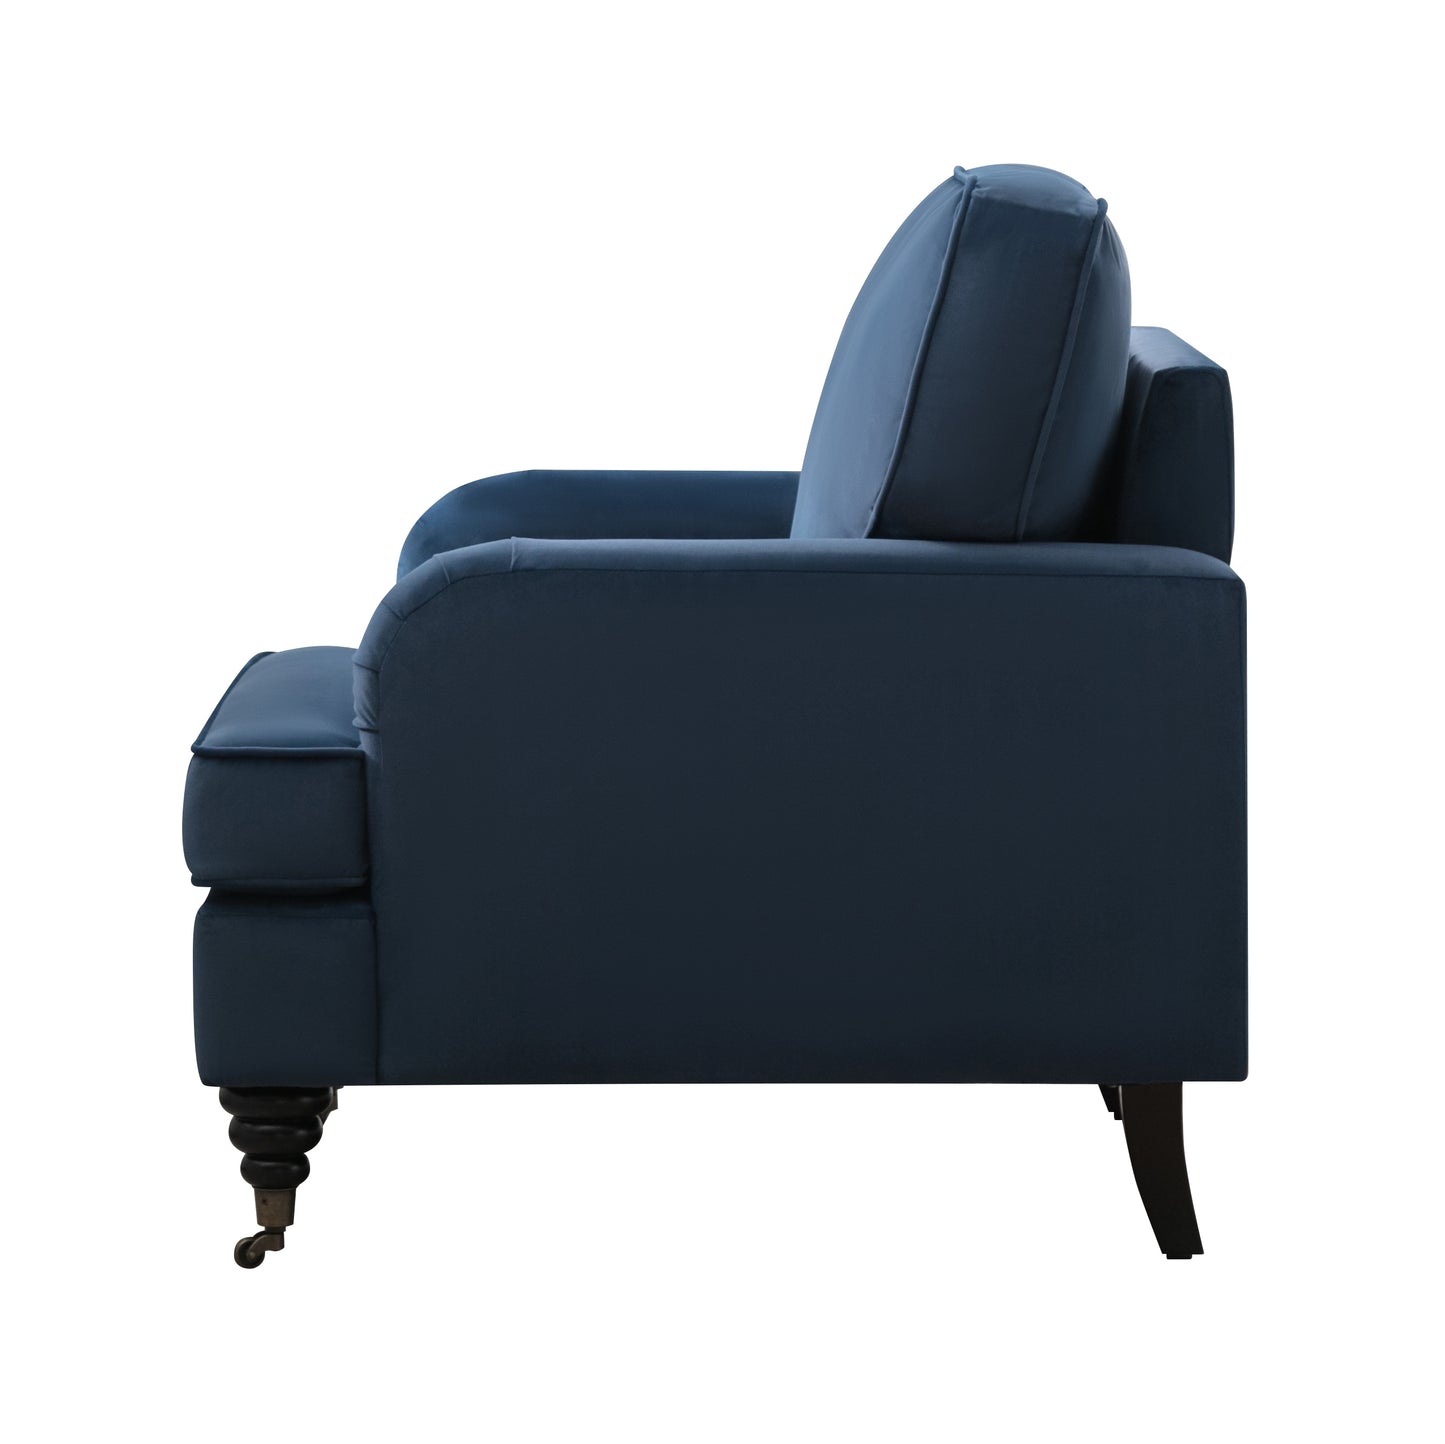 Velvet Accent Chair, Sofa Armchair with Casters, Mid-Century Modern Velvet Upholstered Comfort Oversized Armchair with Wooden Legs, Reading Chairiving Room Chair, Dark Blue